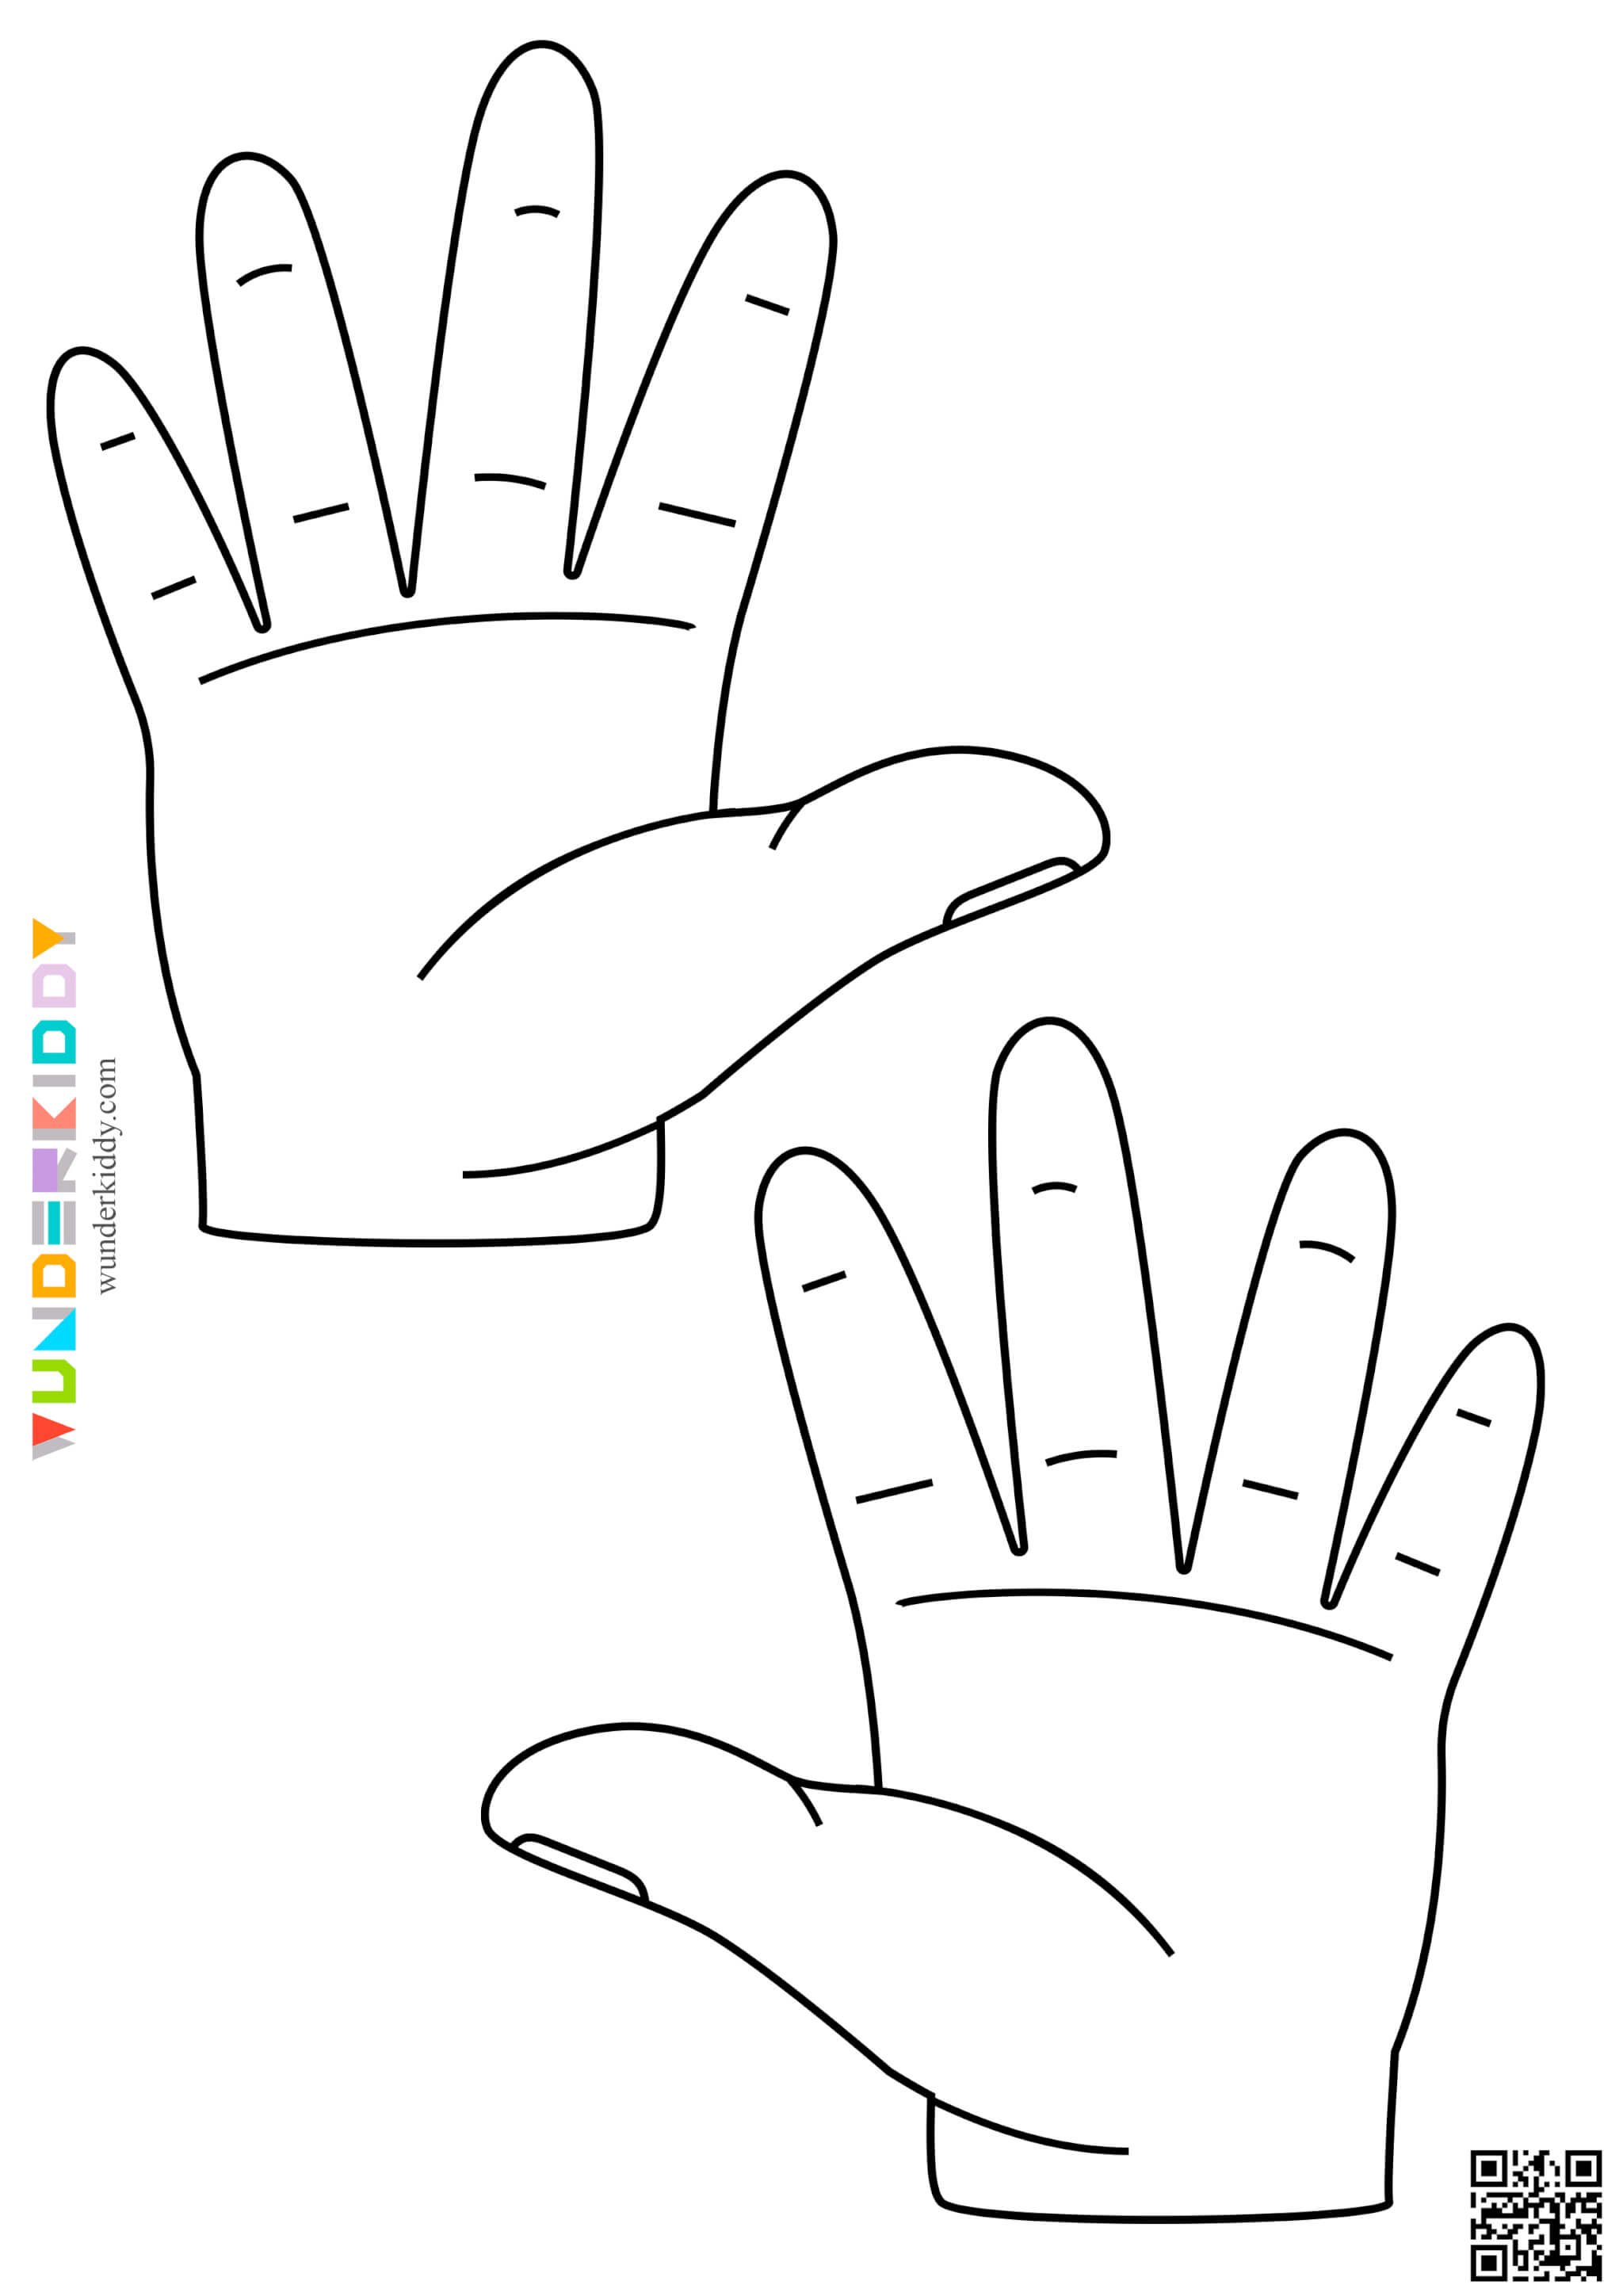 Printable left and right hand blank template for crafts